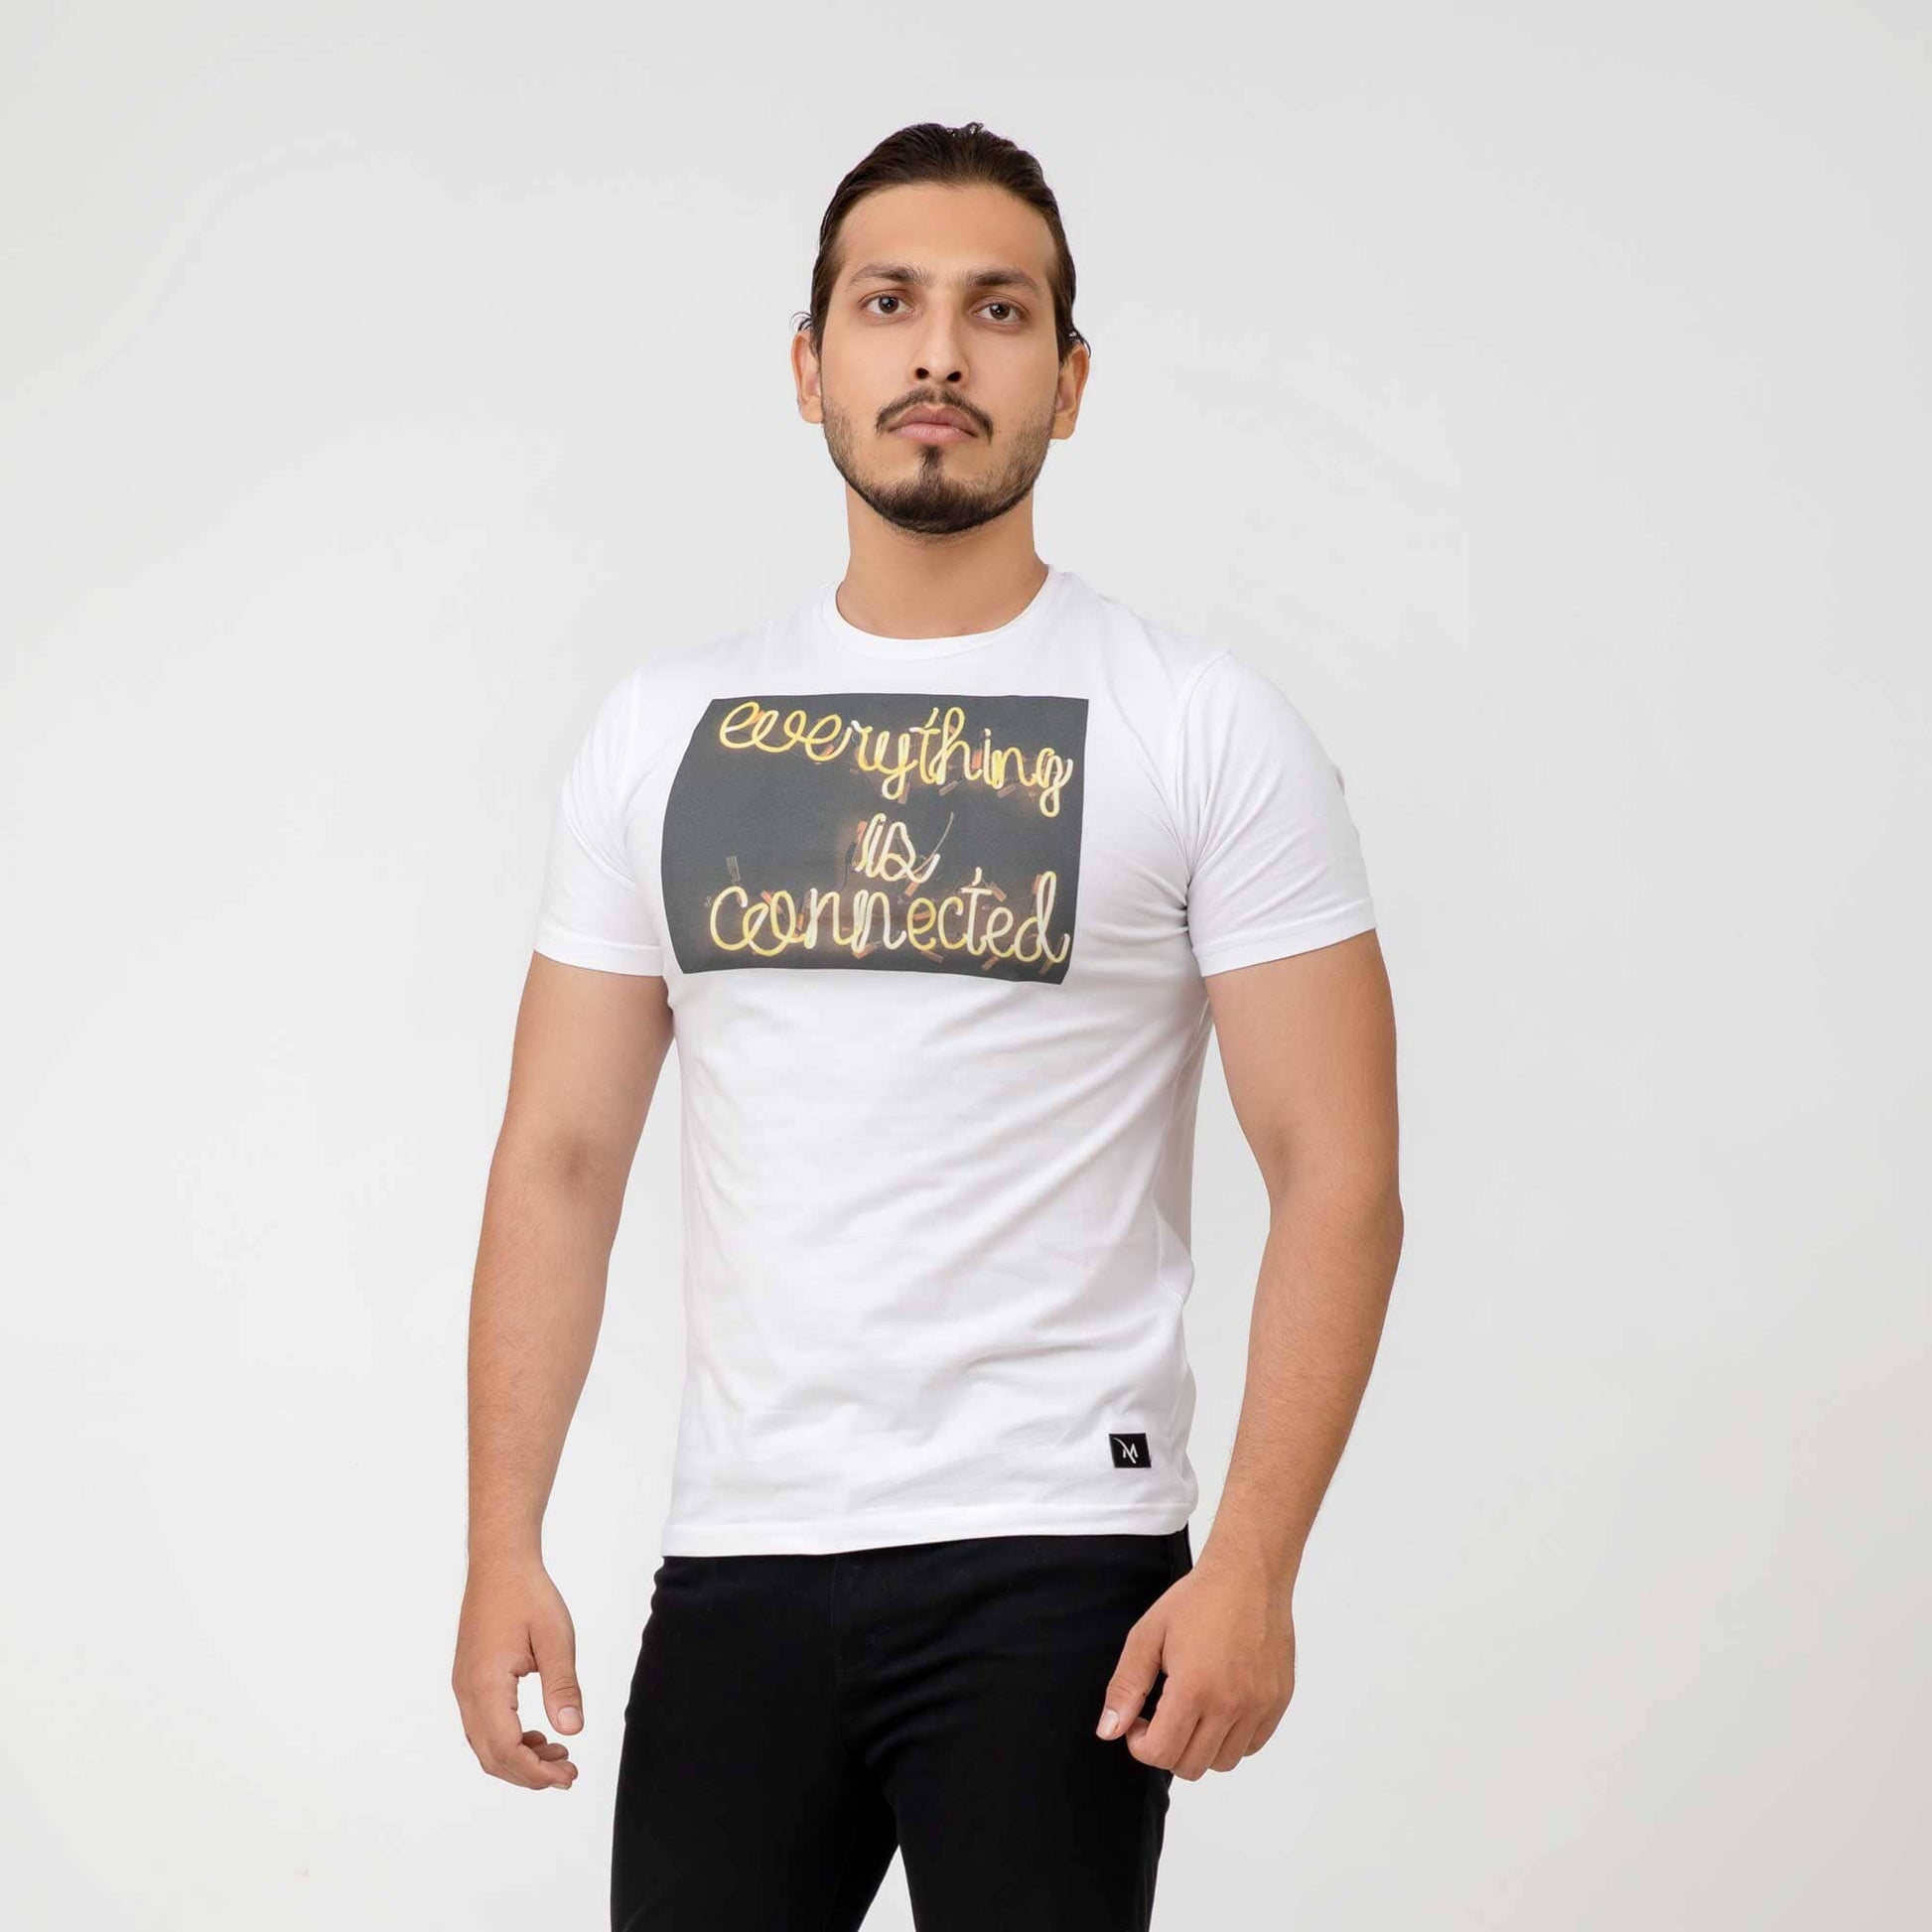 Madamadam Men's Every Thing Is Connected Printed Crew Neck Tee Shirt Men's Tee Shirt MADAMADAM White S 